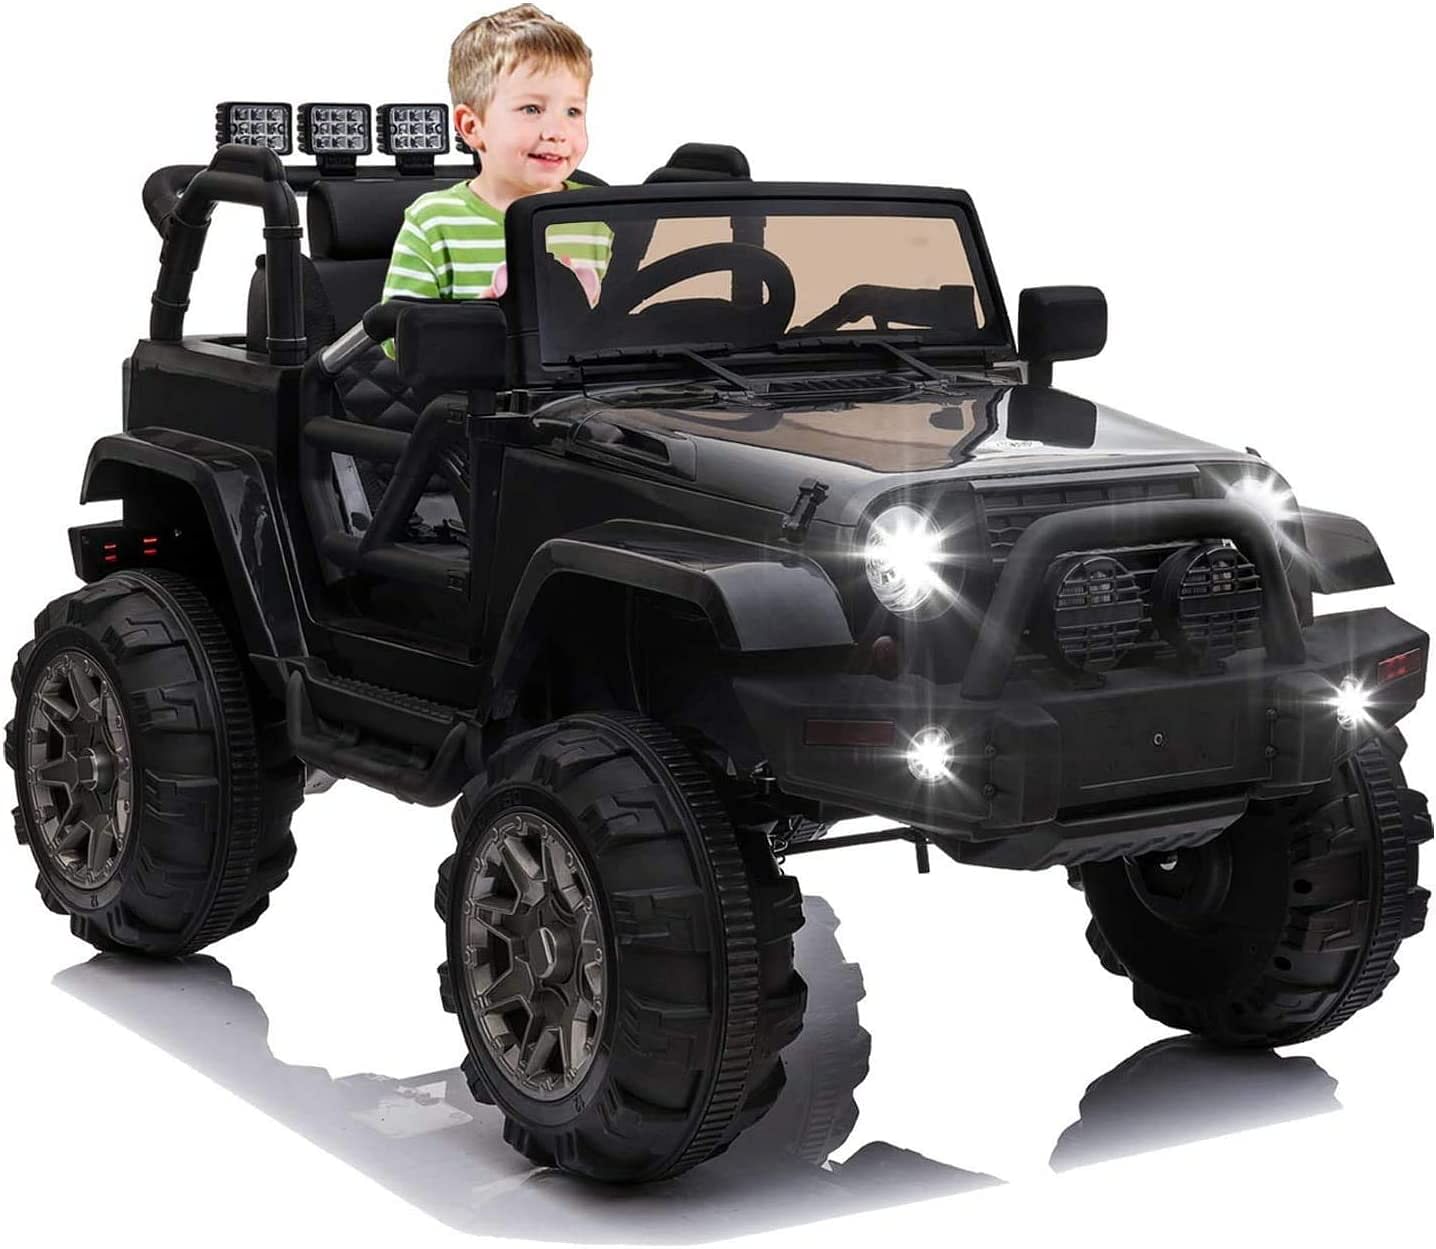 MM TOYS  4 x 4 Electric Ride On Jeep For Kids 3 To 10 Years Old Kids 12V , With USB MP3 Player , Swag - Black